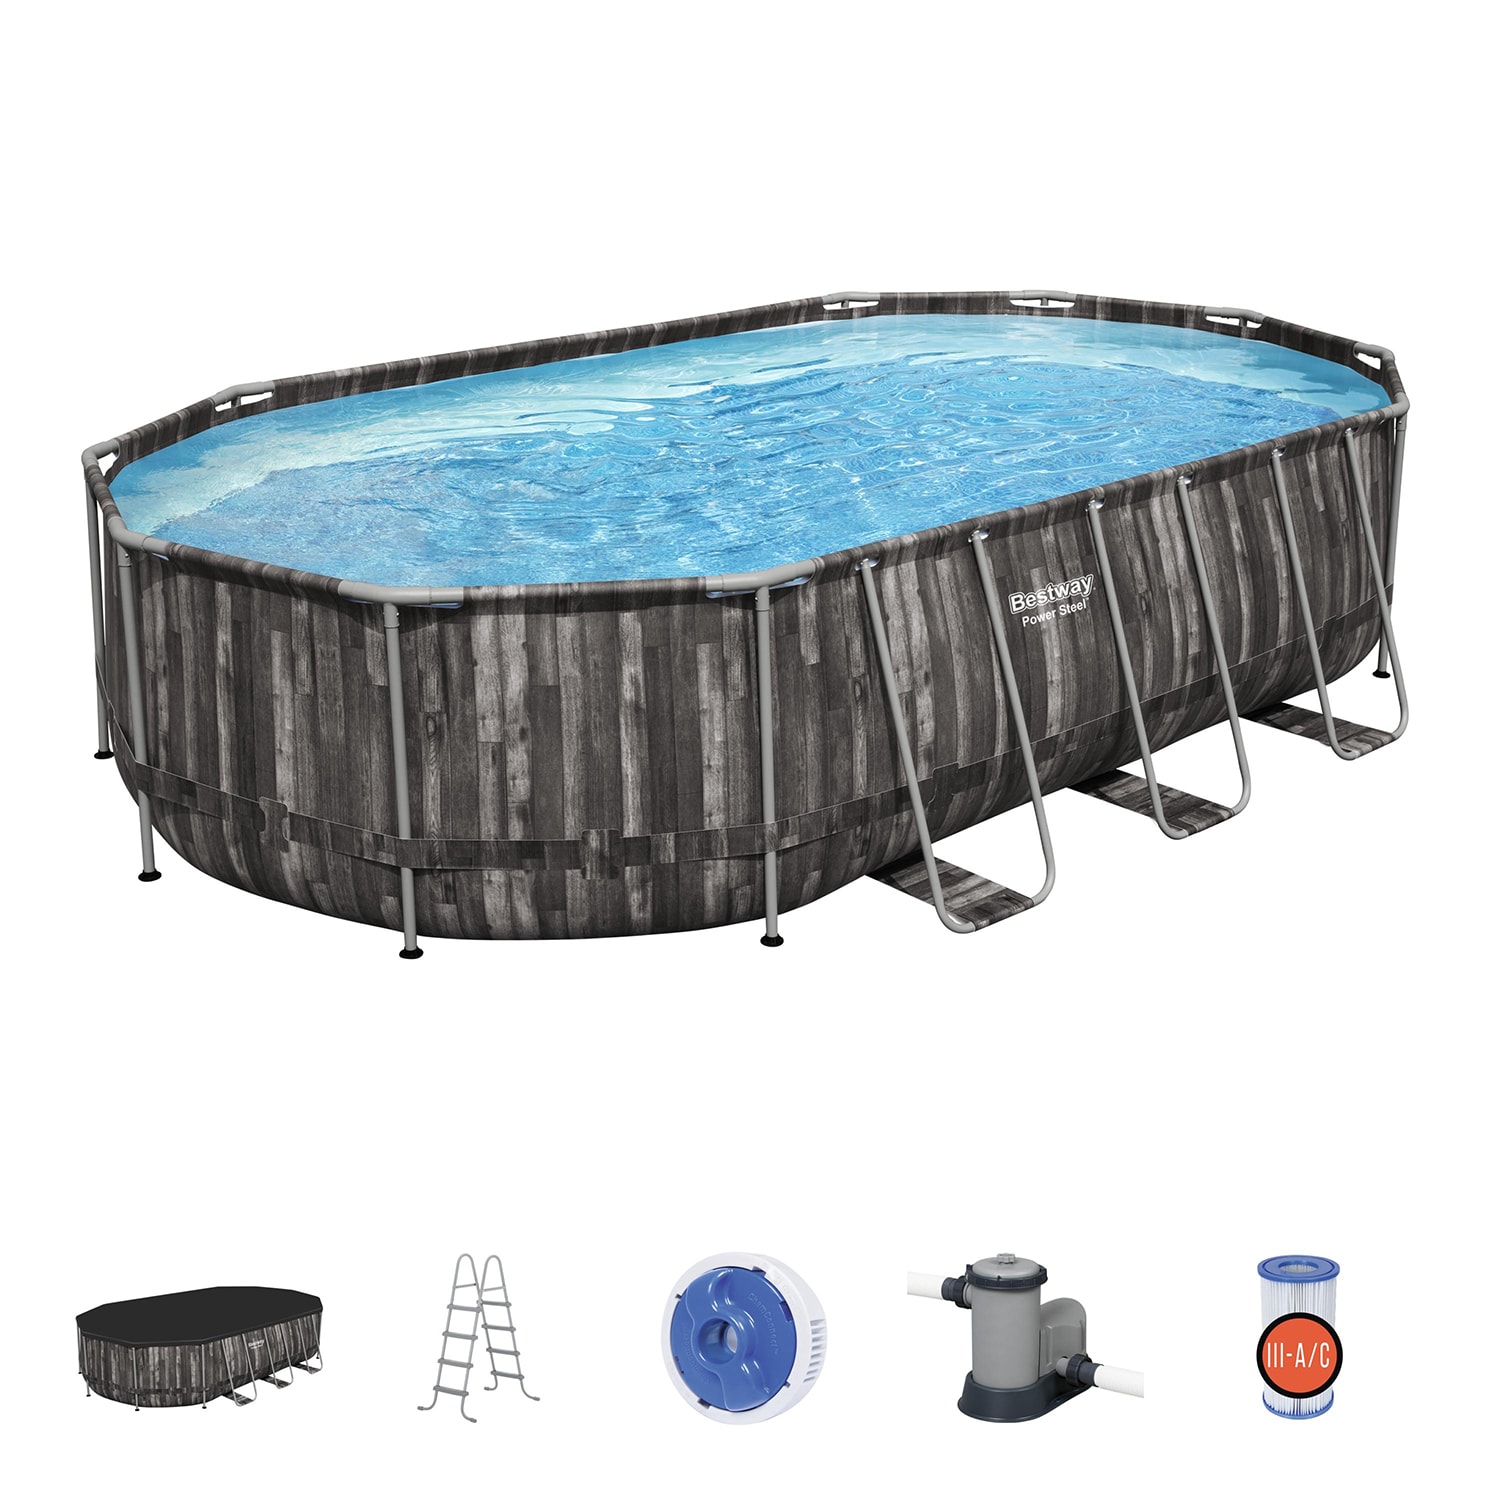 Bestway 20-ft x 12-ft department with Ladder and Cover Pool 48-in Metal Oval Pools Above-Ground Pool Above-Ground Frame x at the in